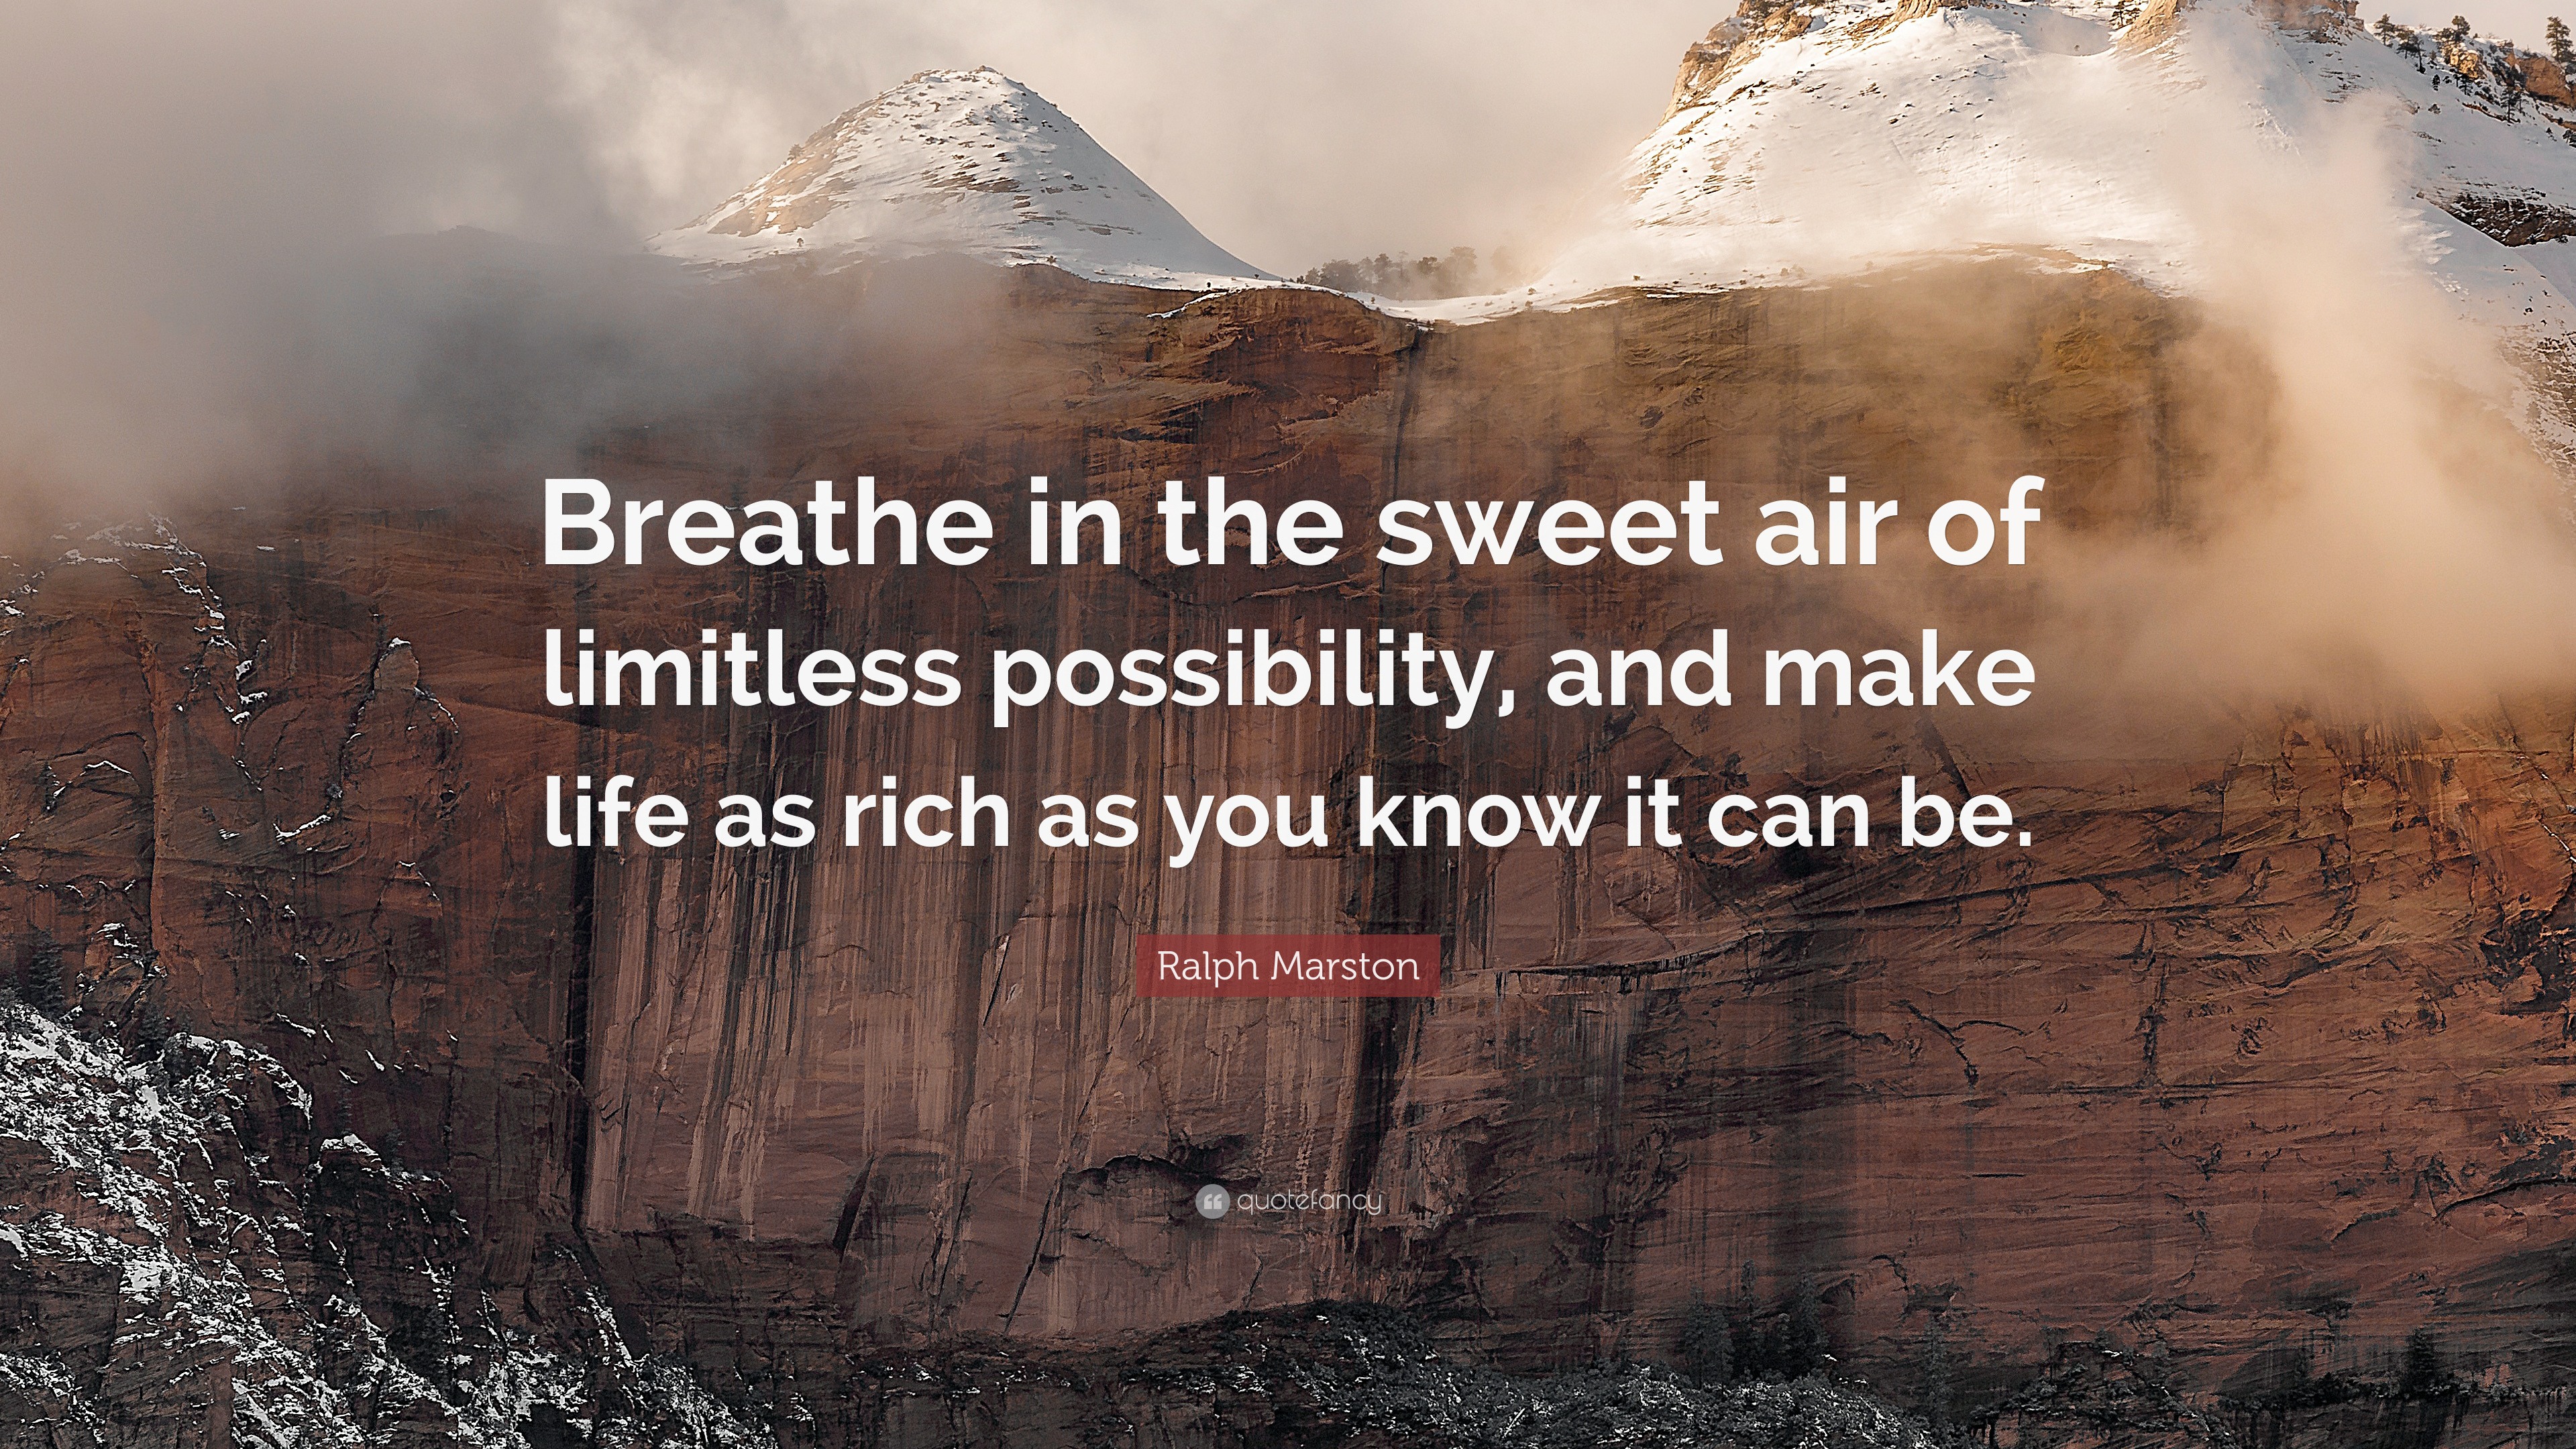 Ralph Marston Quote: “Breathe in the sweet air of limitless possibility